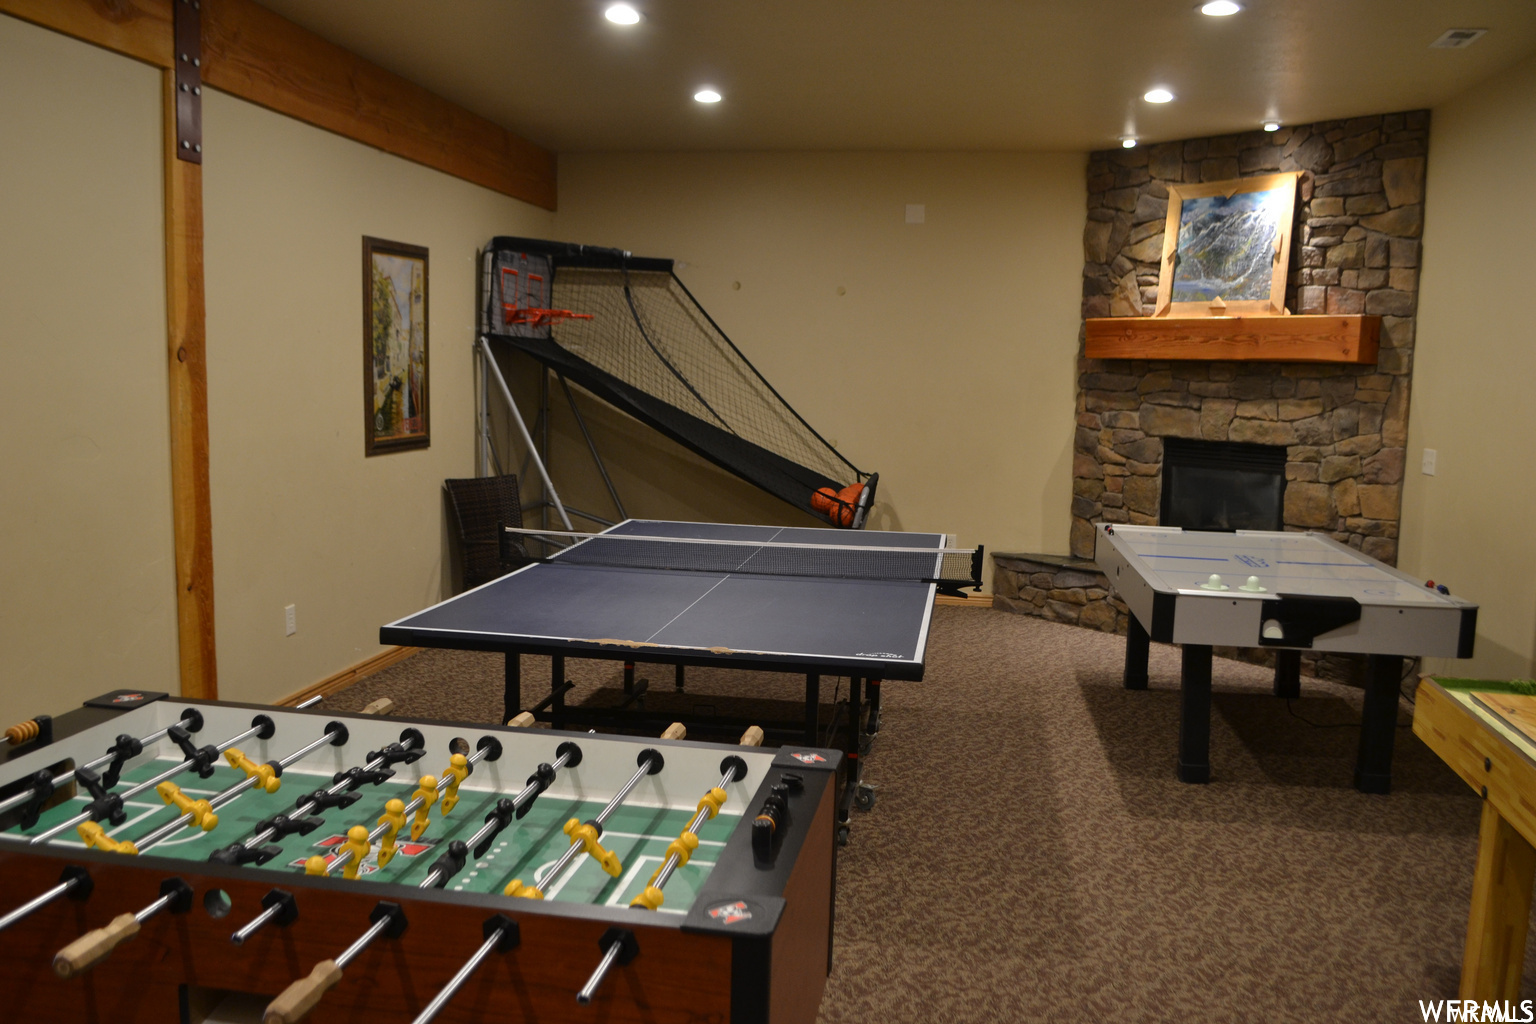 Community Other: Community Game Room